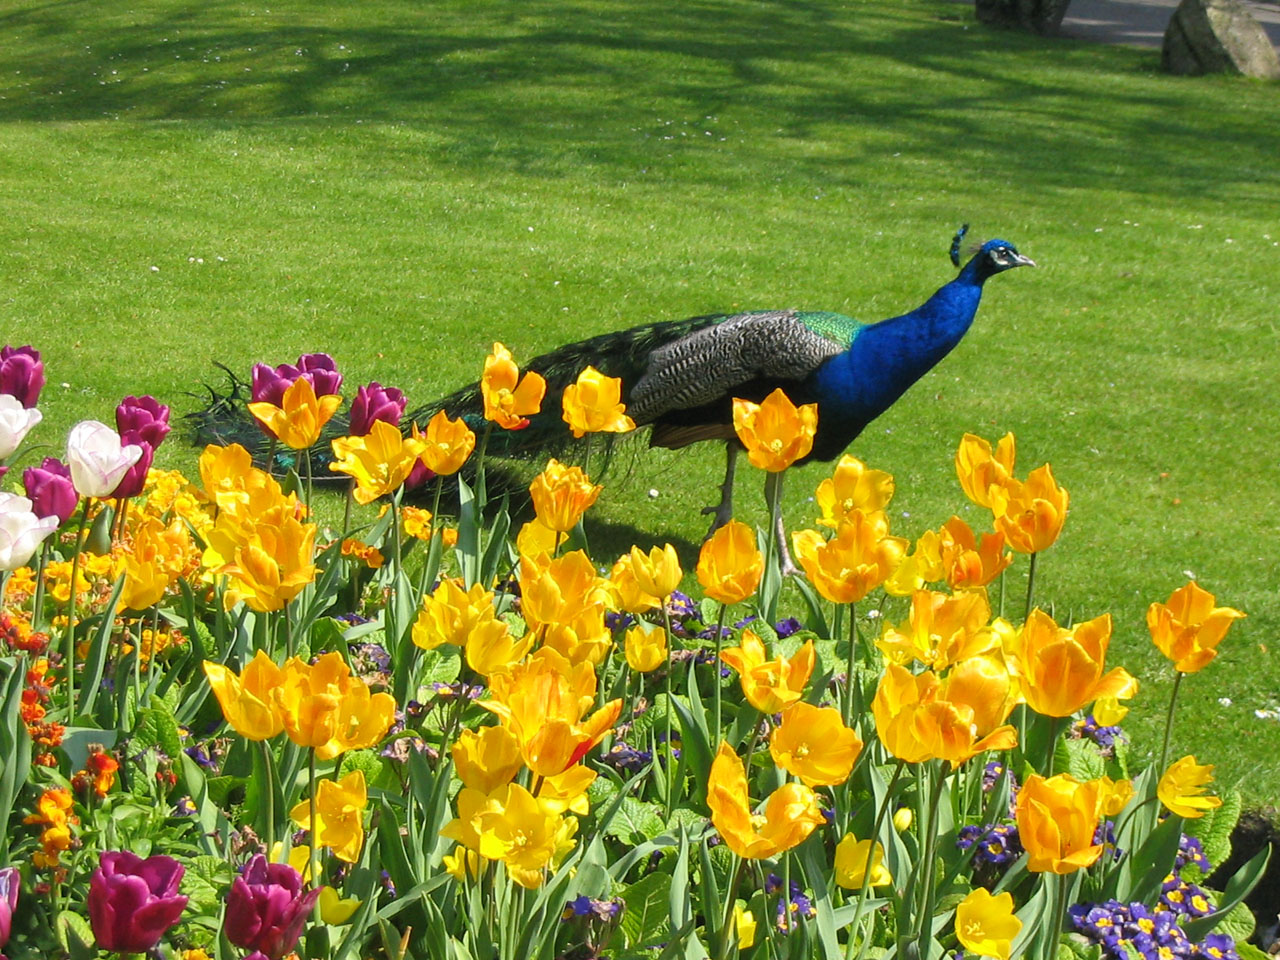 Peacock And Flowers